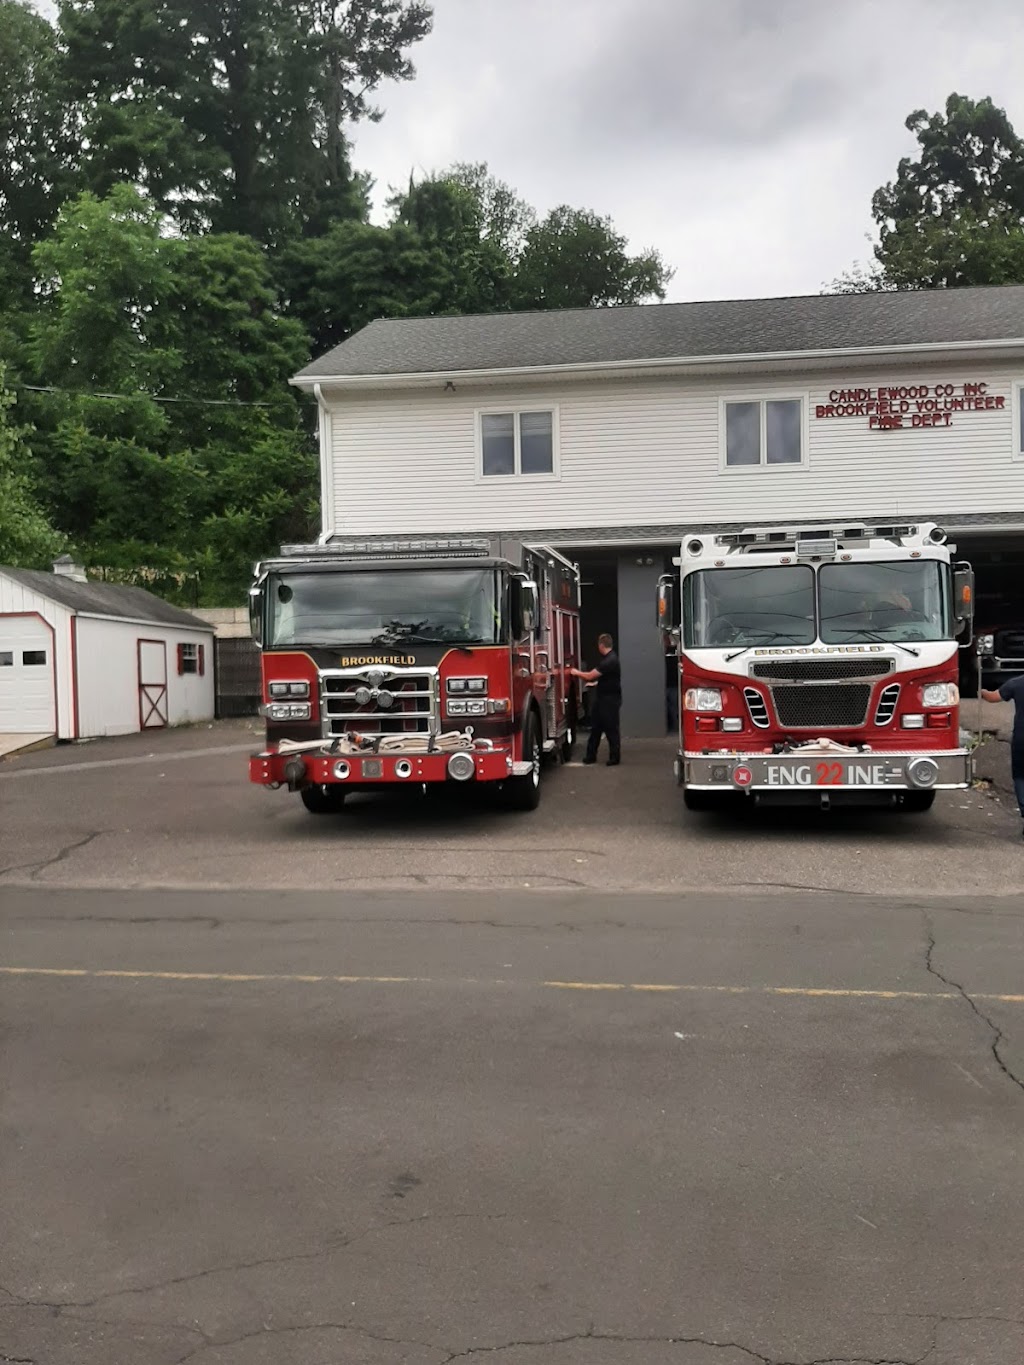 Brookfield Vol. Fire Dept. Candlewood Company Inc. | 18 Bayview Dr, Brookfield, CT 06804 | Phone: (203) 775-2440